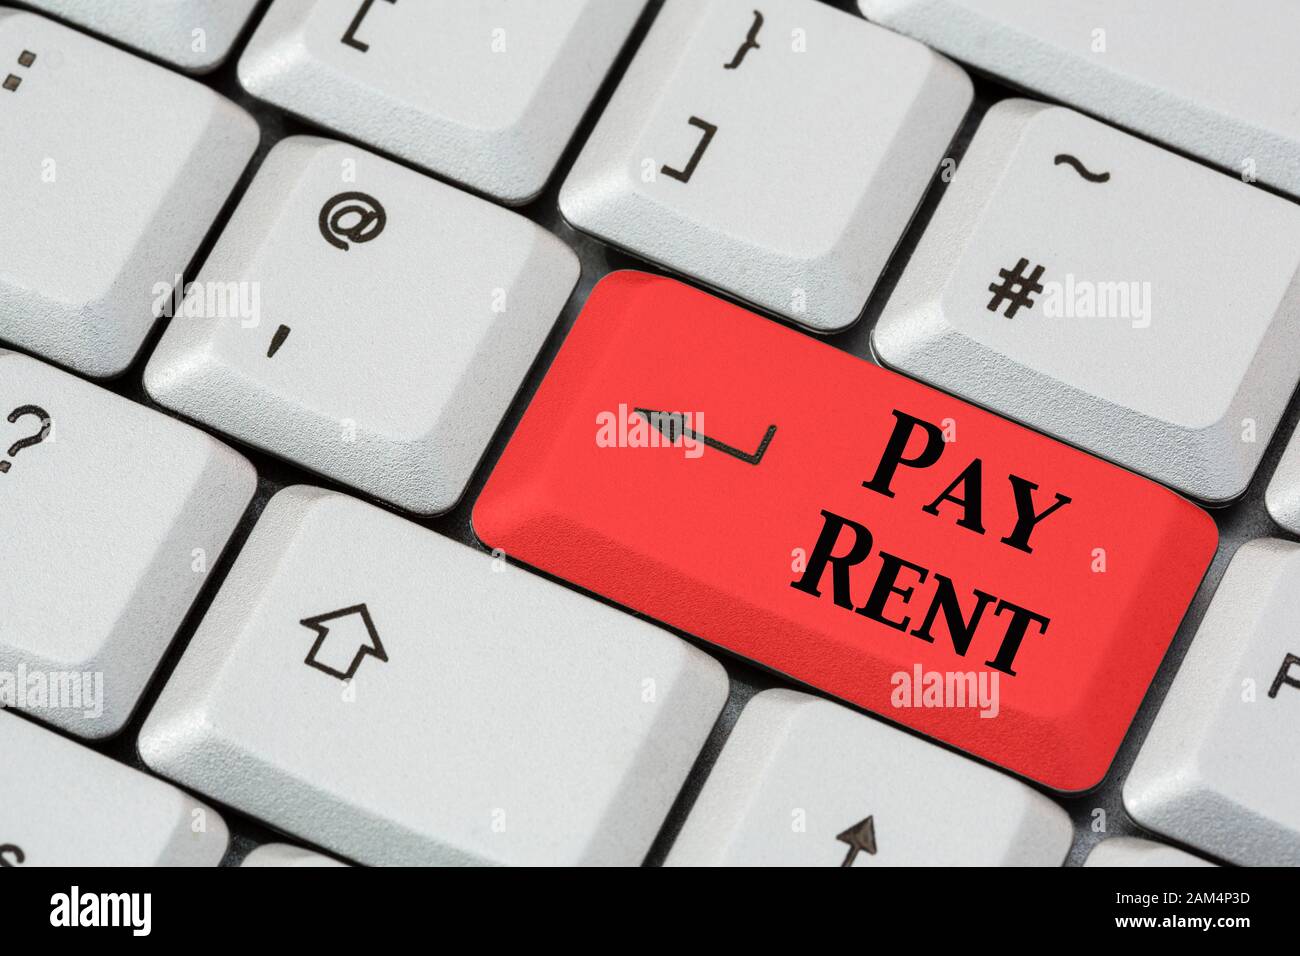 A keyboard with Pay Rent written in black lettering on a red enter key. Renting property rental tenant tenancy concept. England, UK, Britain Stock Photo